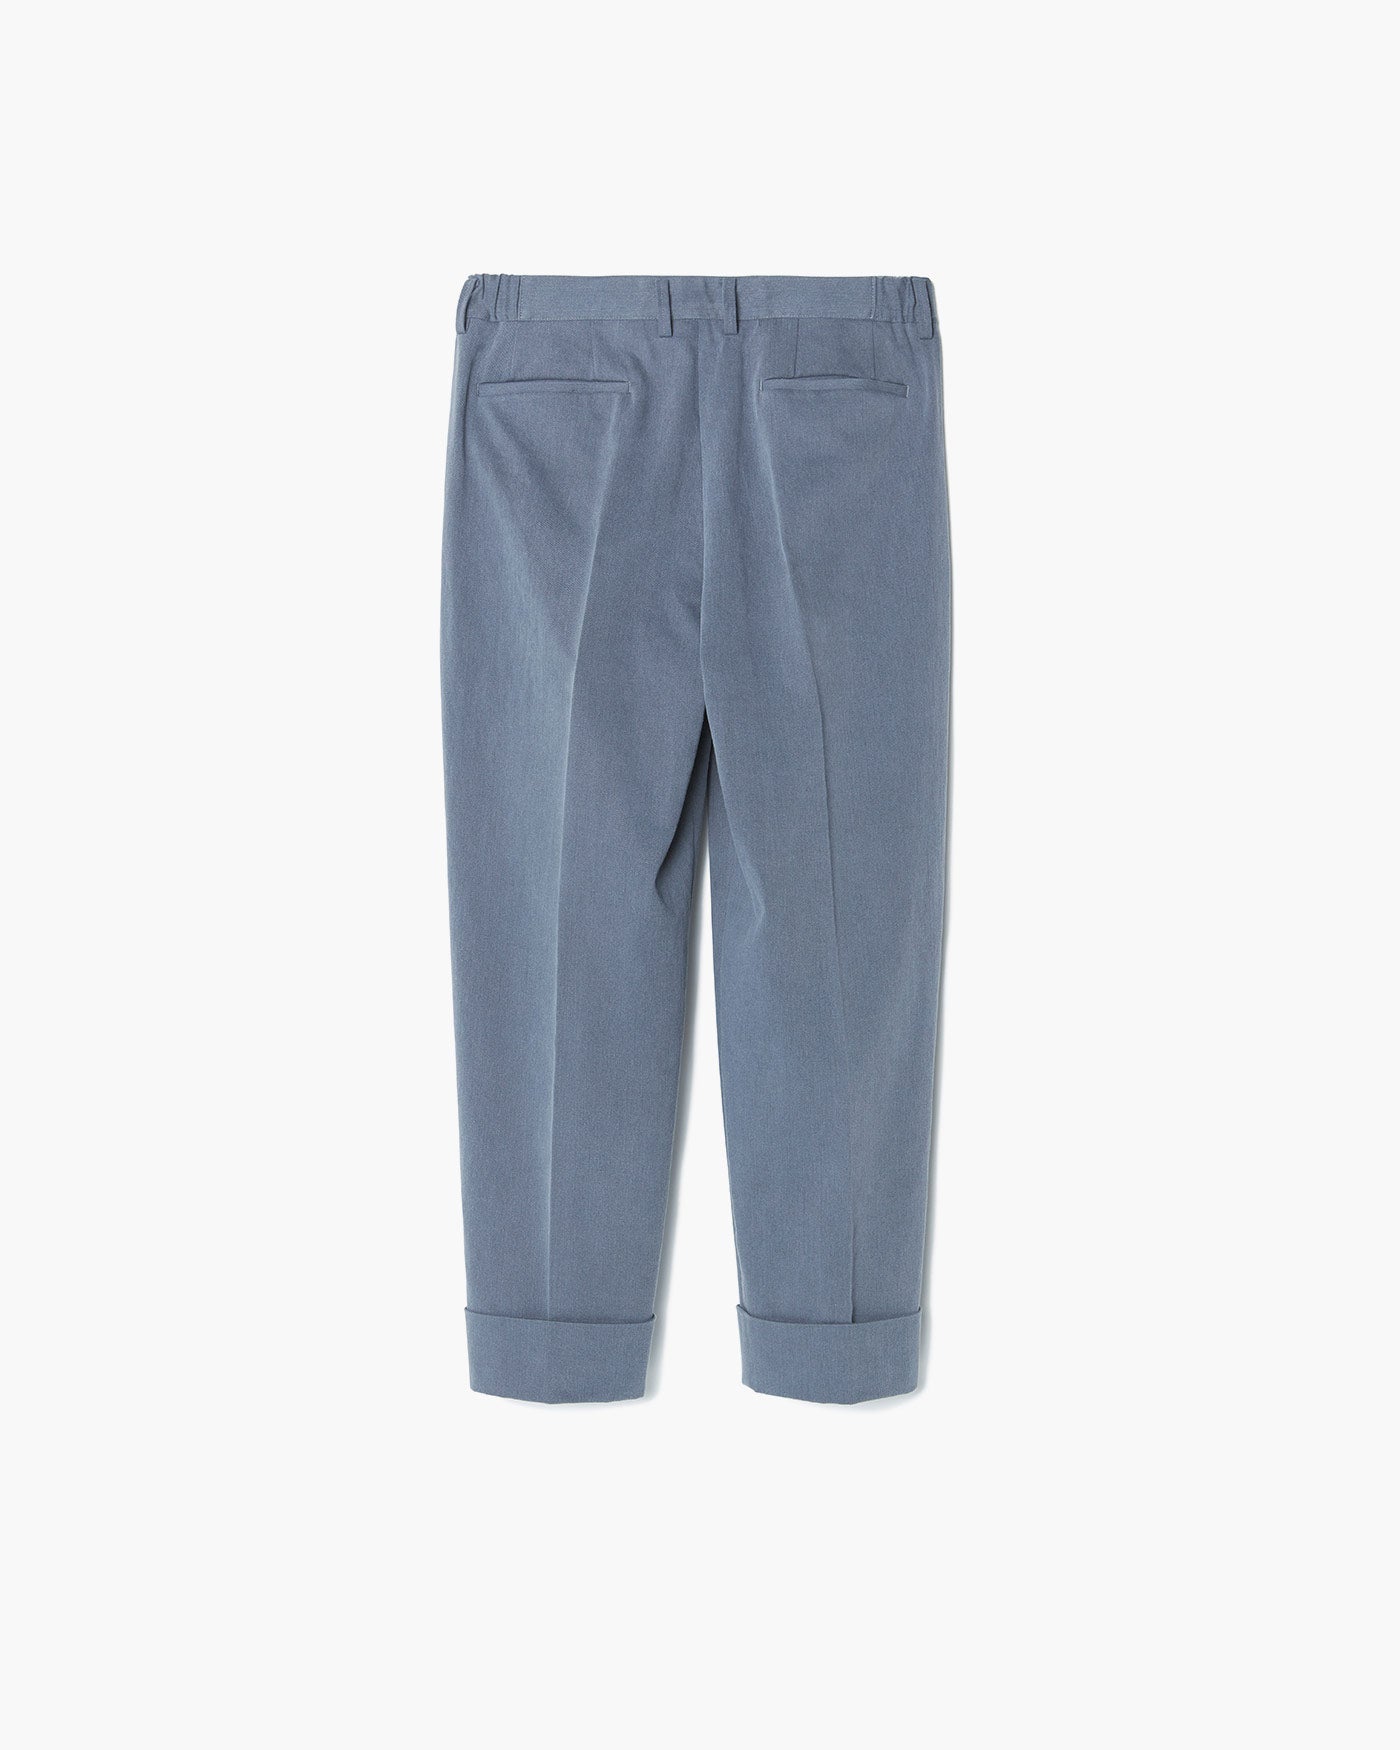 TWO TUCKS TAPERED PANTS